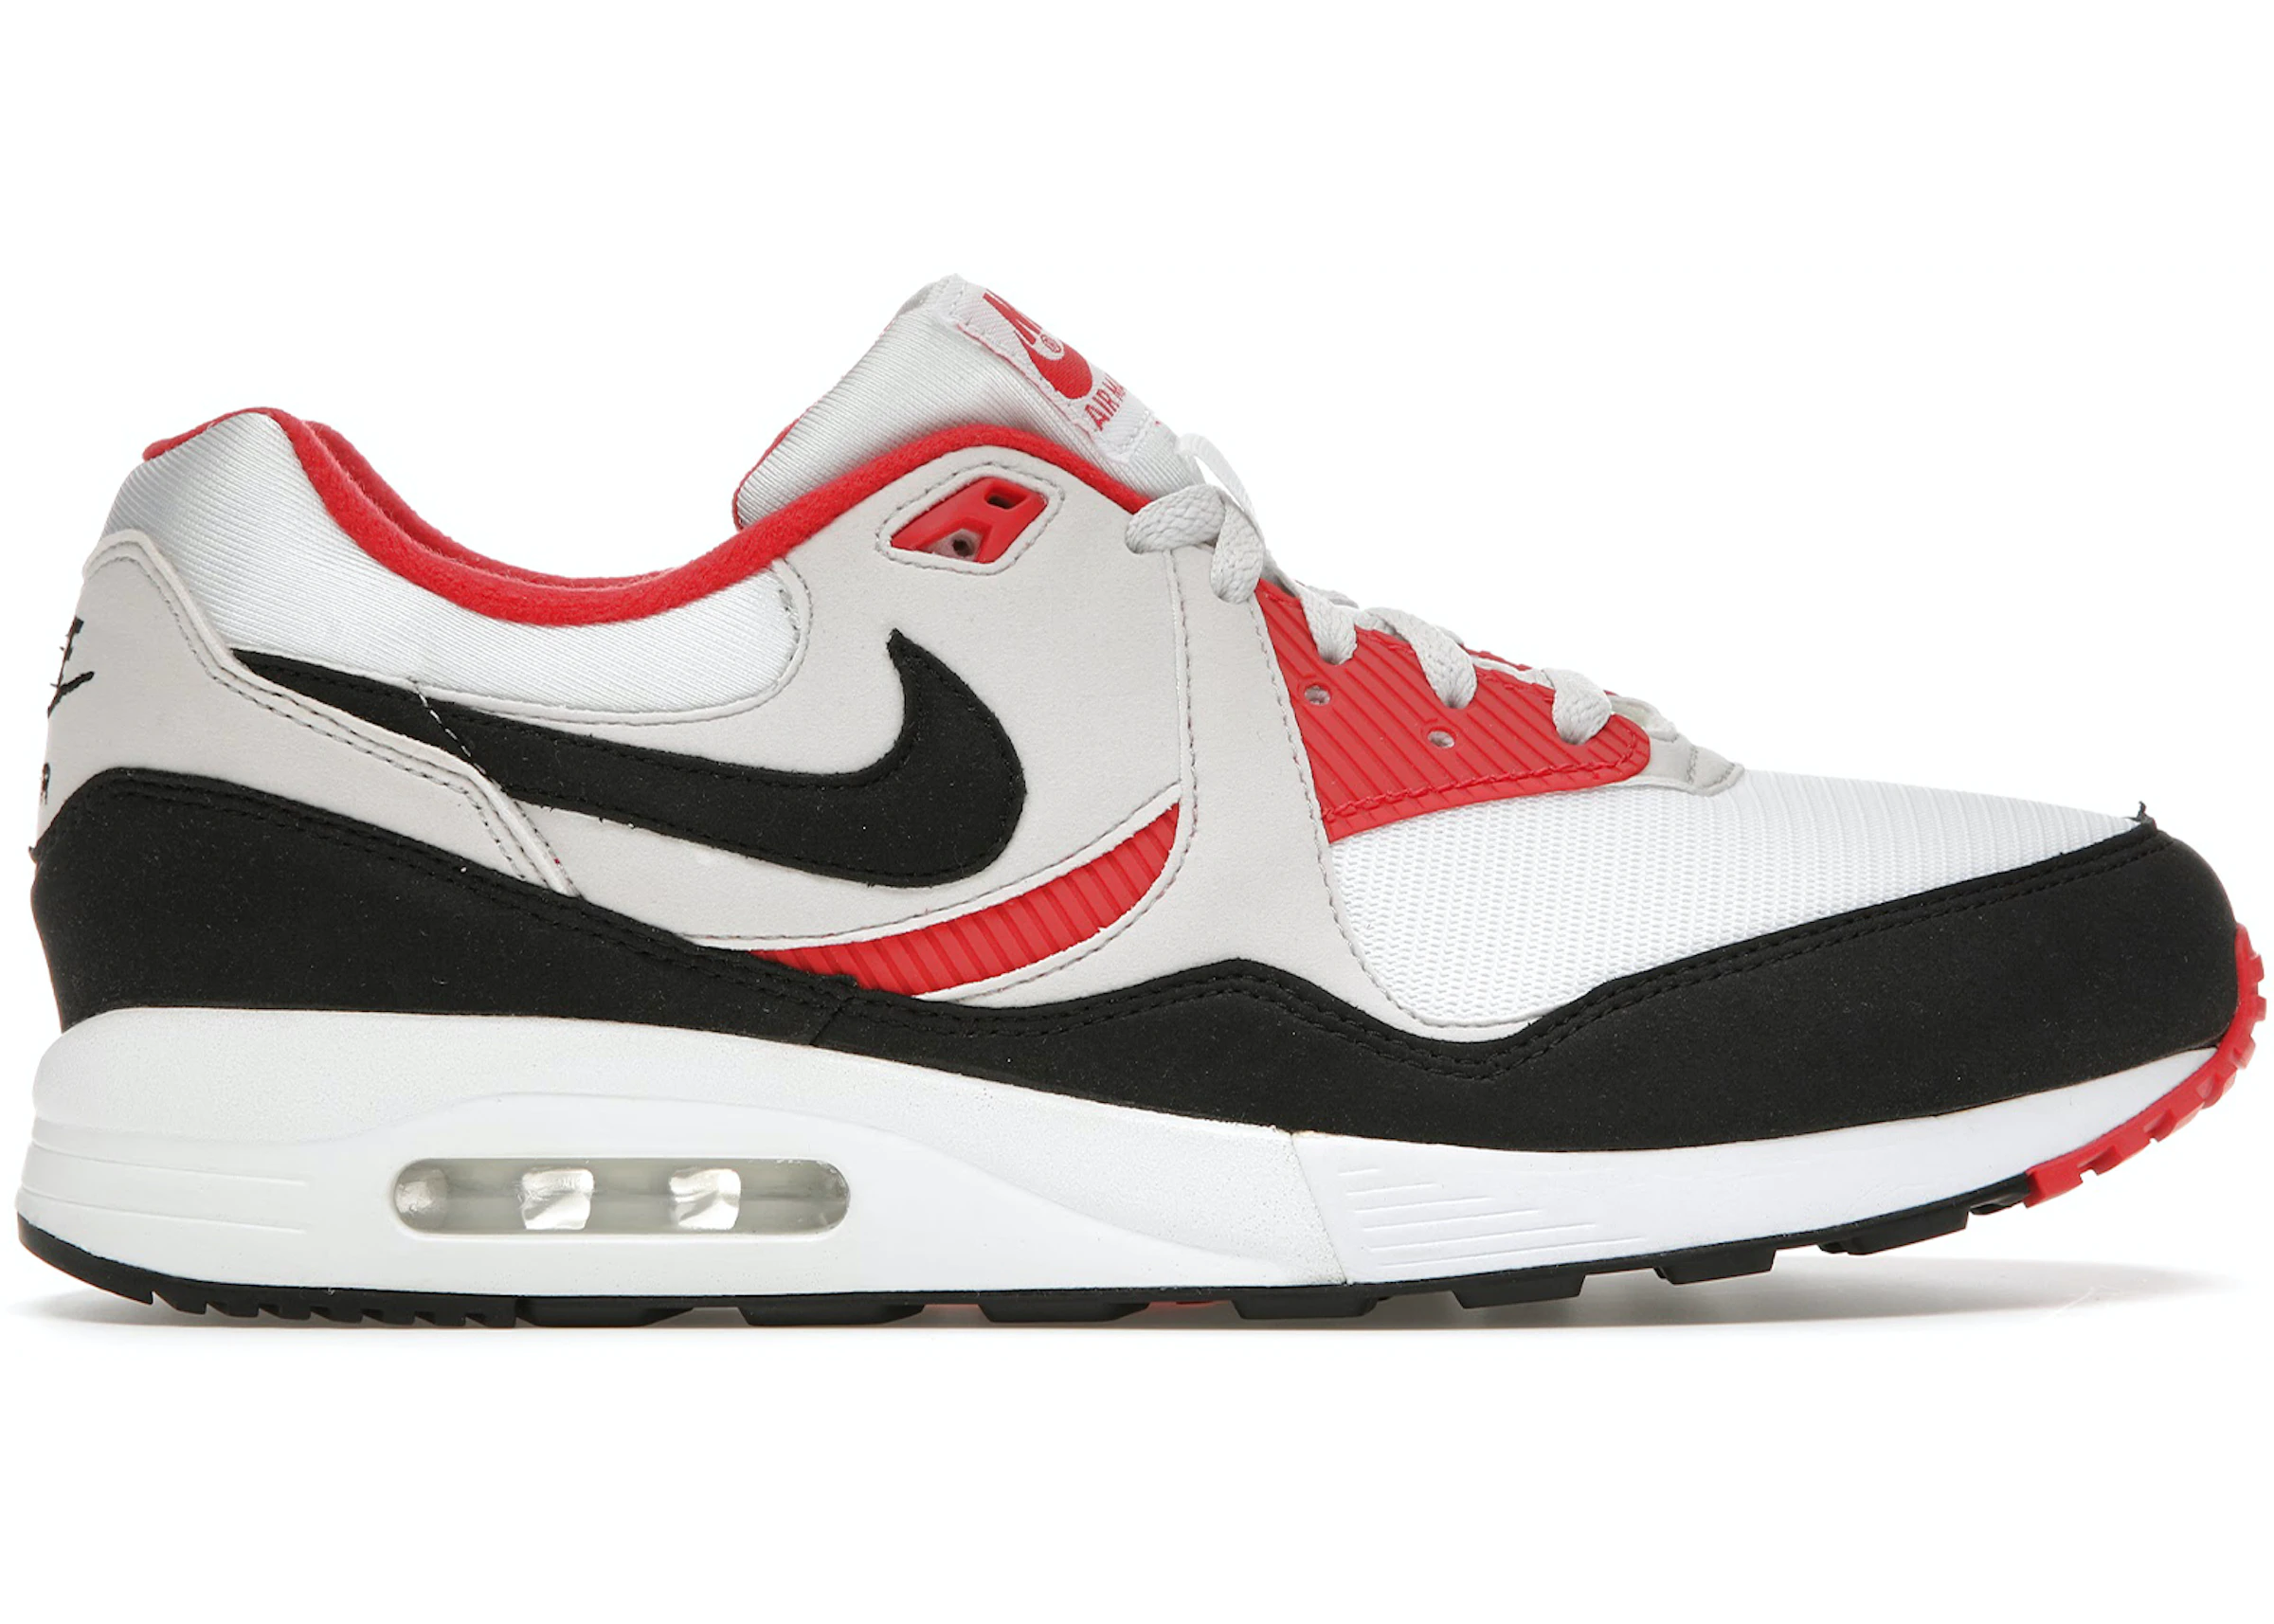 Sanctuary sudden I agree to Nike Air Max Light White Black Grey Red - AO8285-101 - US